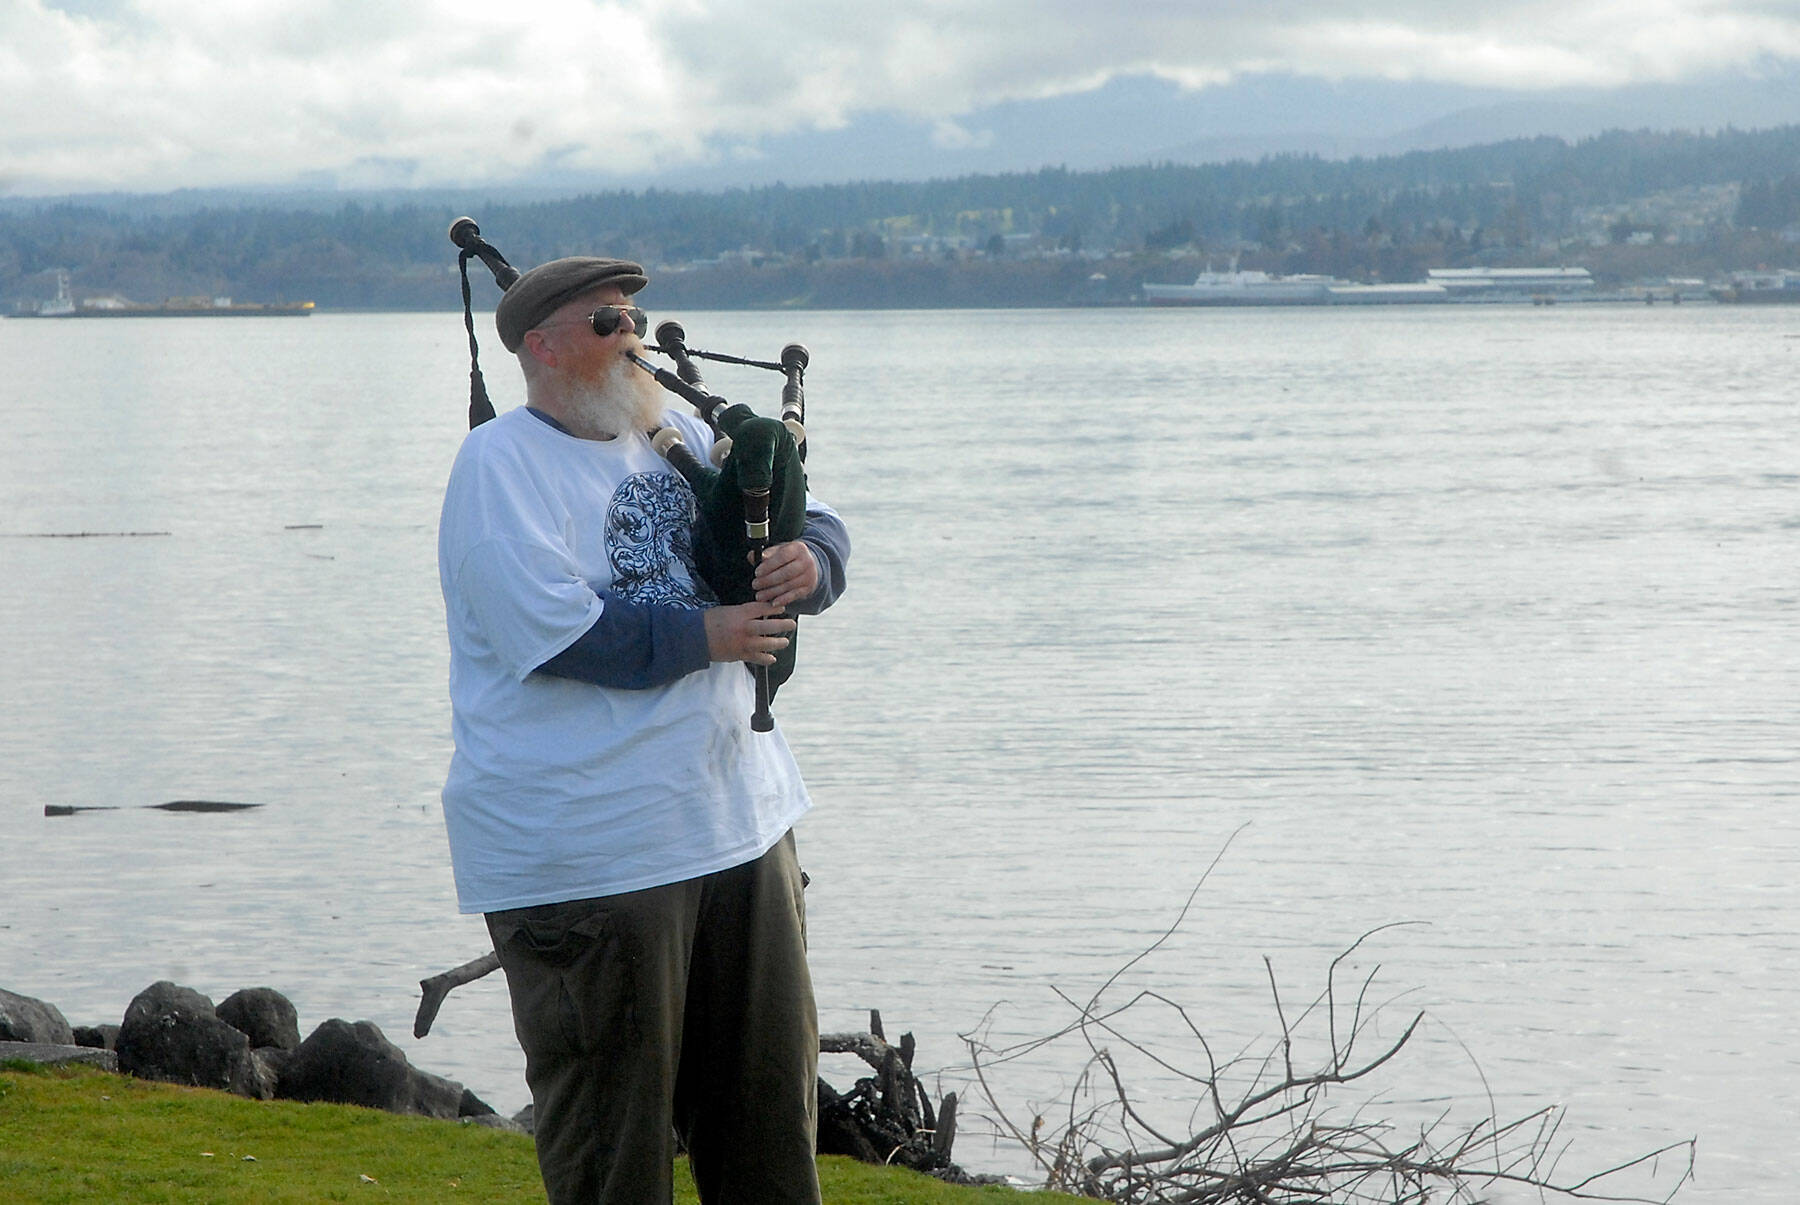 Erik Evans of Port Angeles, otherwise known as the “Parking Lot Piper,” gives a free bagpipe performance on Tuesday at Sail and Paddle Park on Ediz Hook in Port Angeles. (Keith Thorpe/Peninsula Daily News)